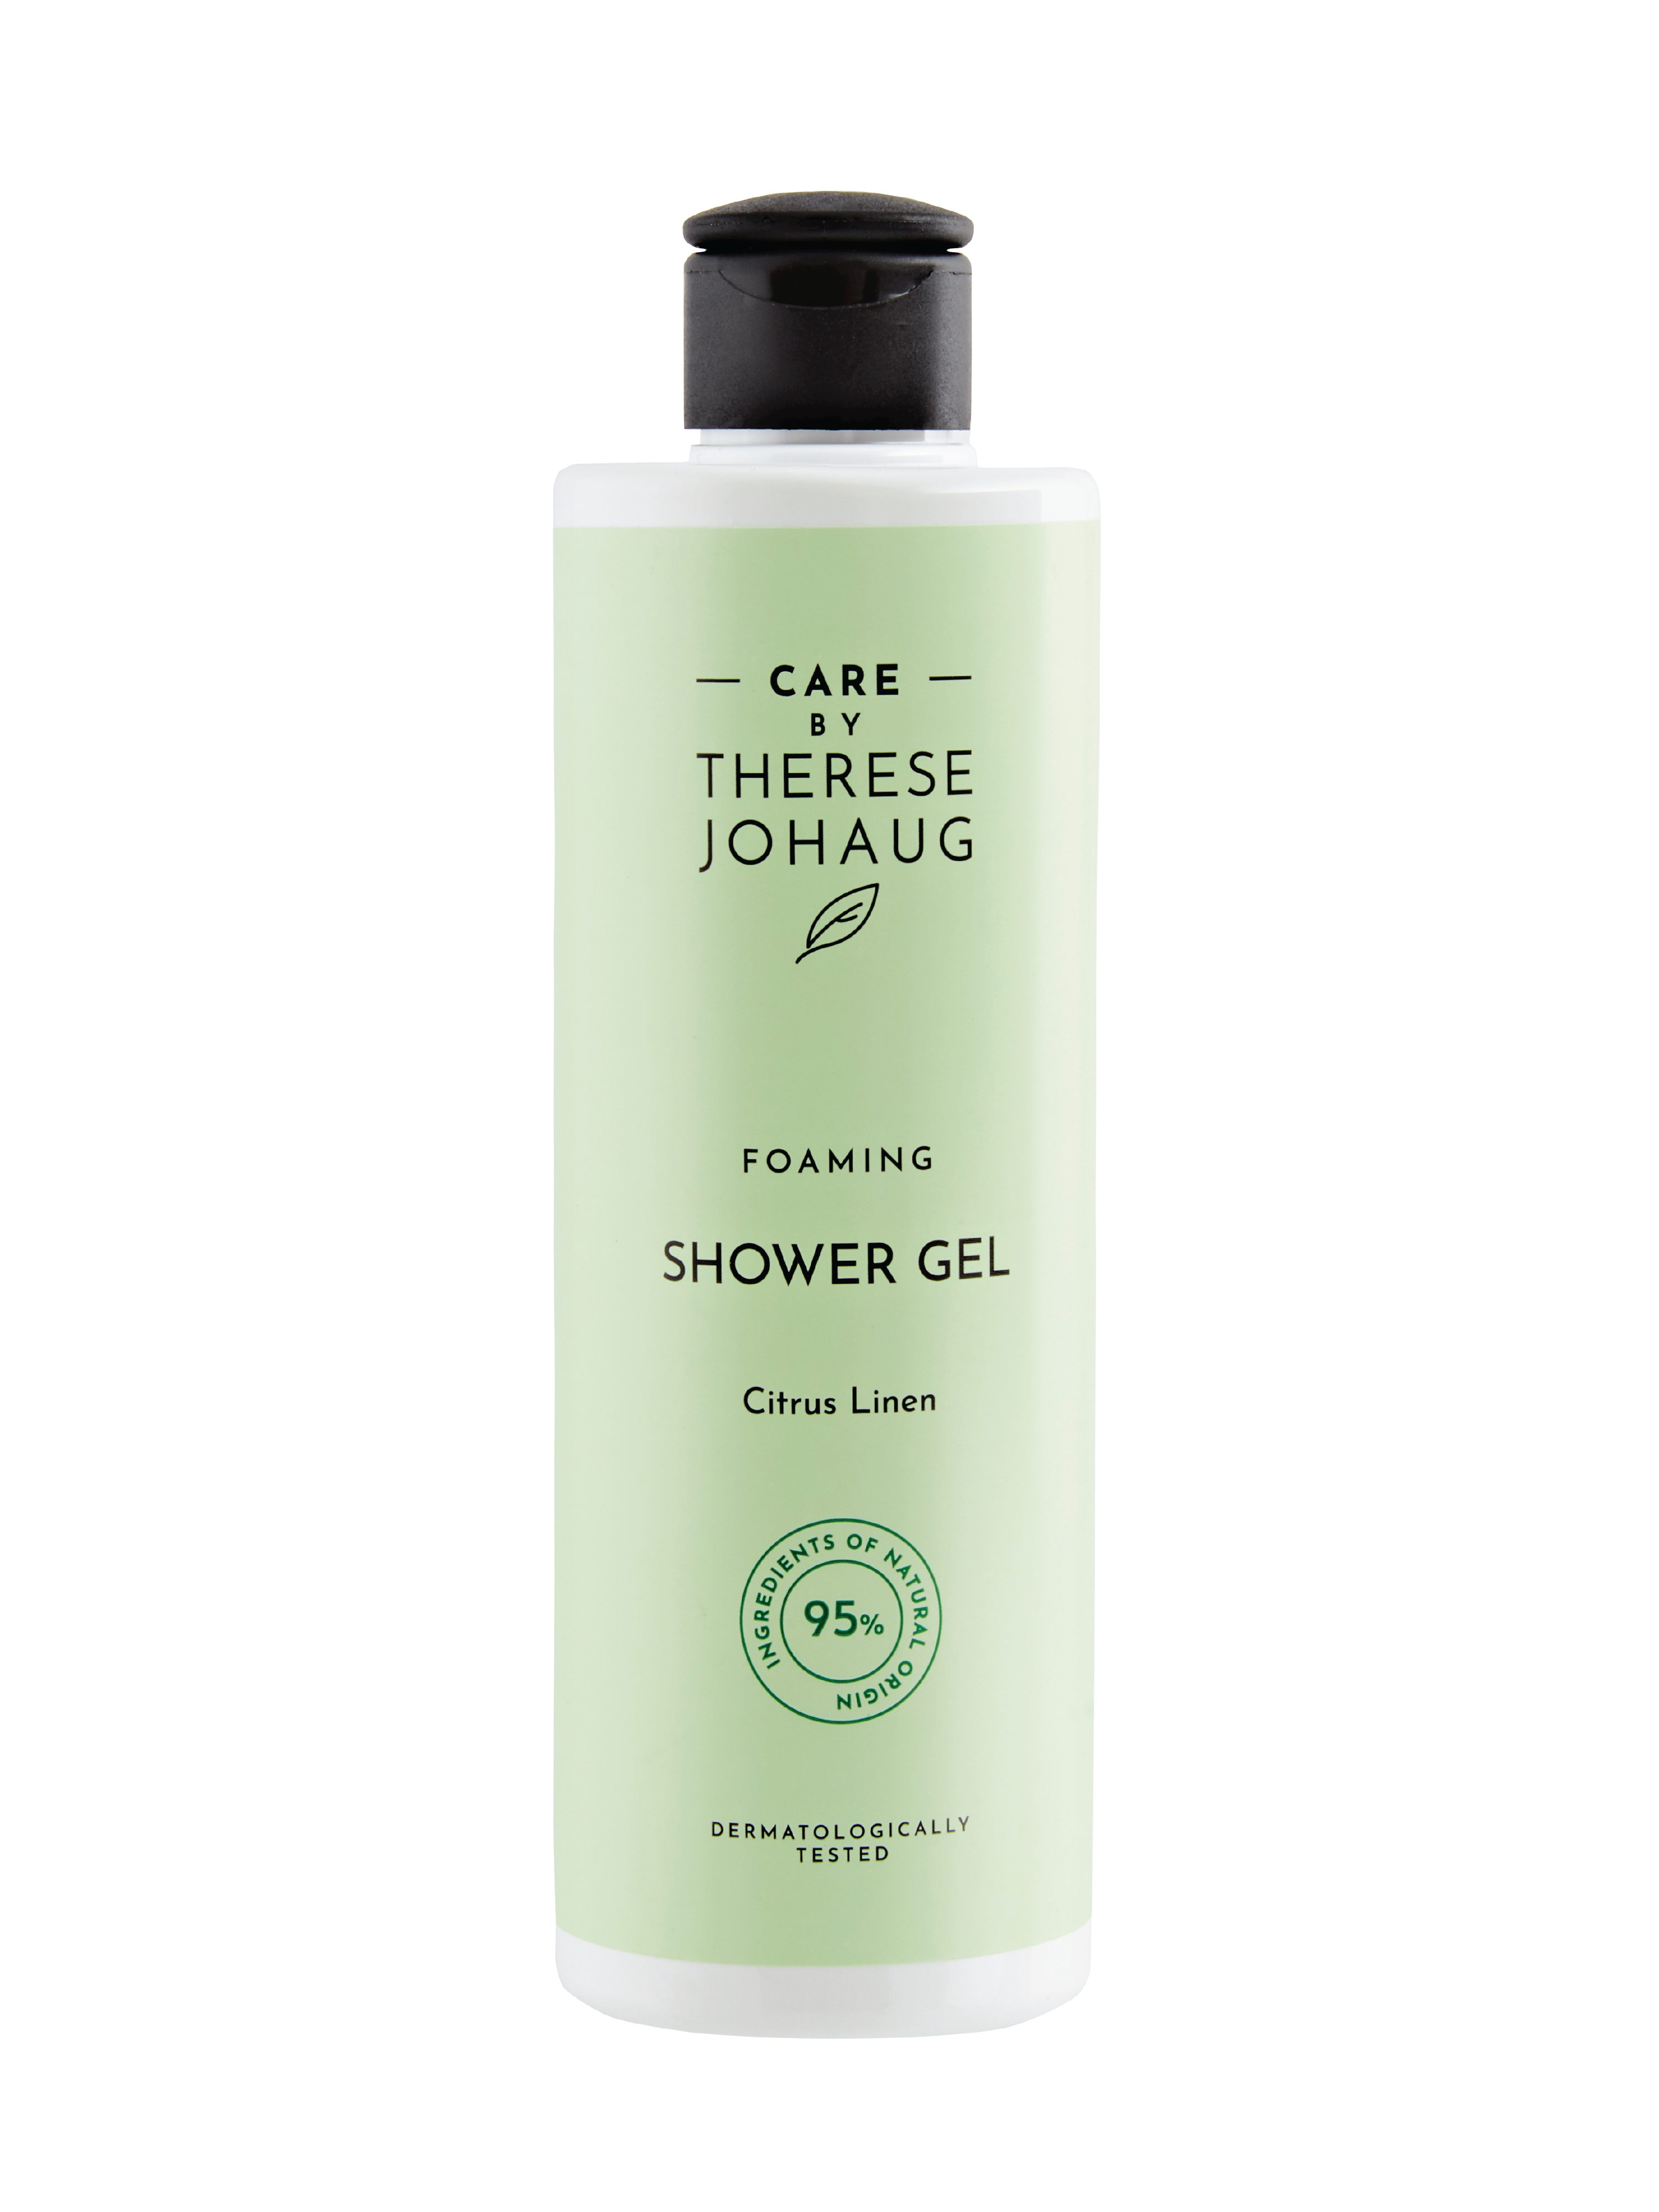 Care by Therese Johaug Foaming Shower Gel Citrus Linen, 250 ml